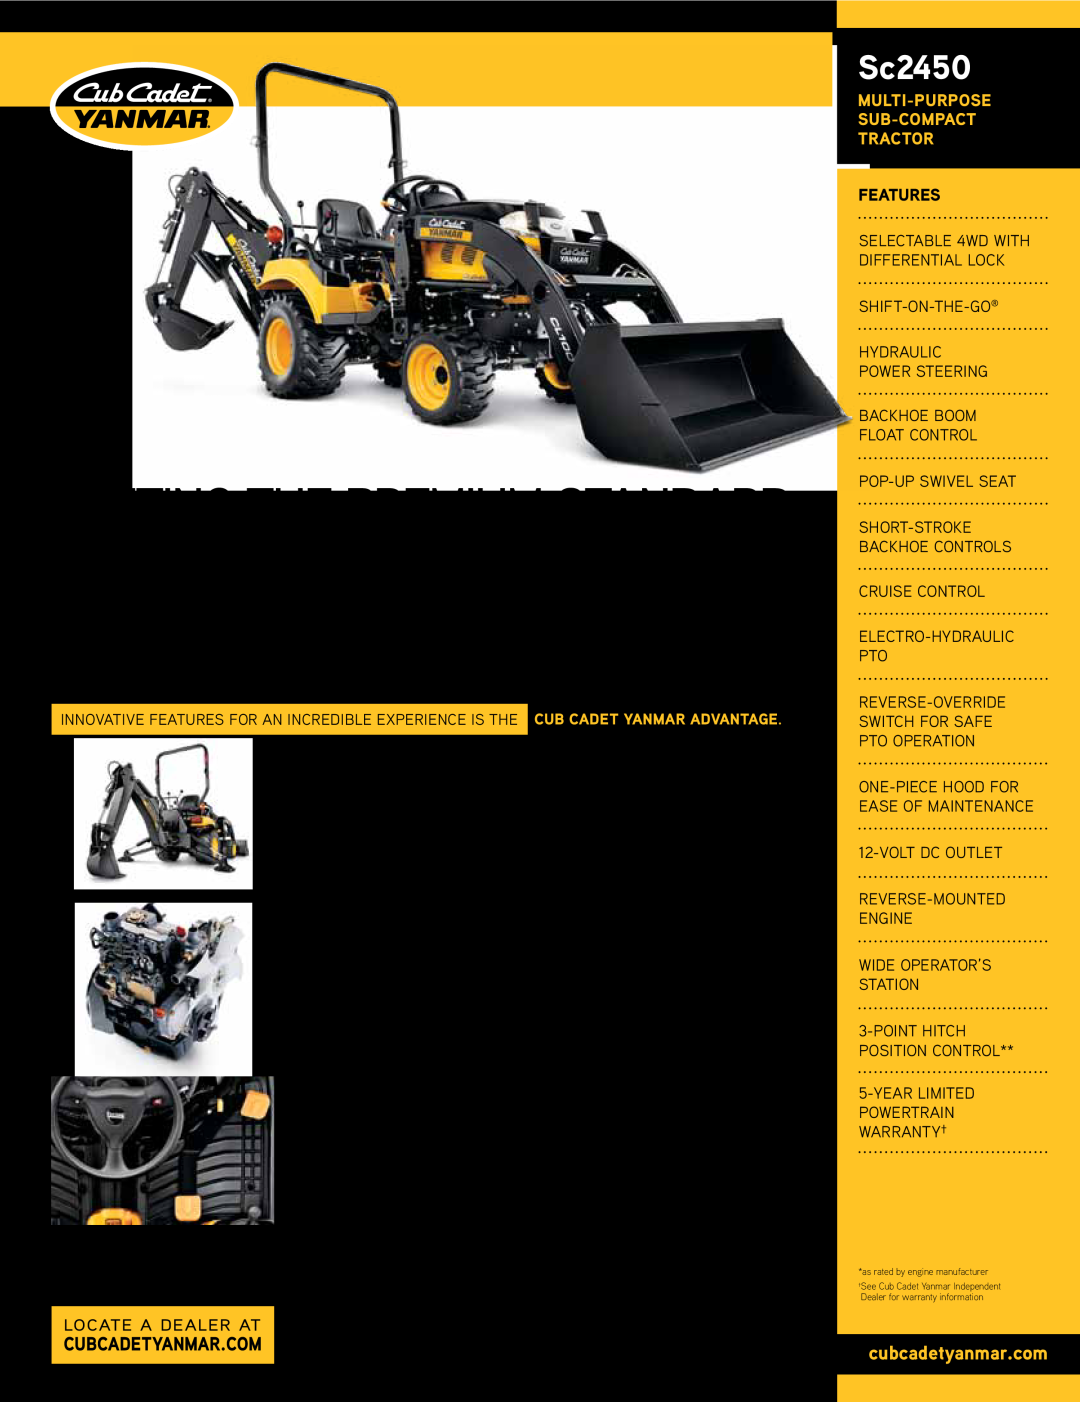 Cub Cadet SC2450 warranty Sc2450, Curved Boom Loader and Backhoe, 24 HP* direct-injectionDiesel Engine, cubcadetyanmar.com 